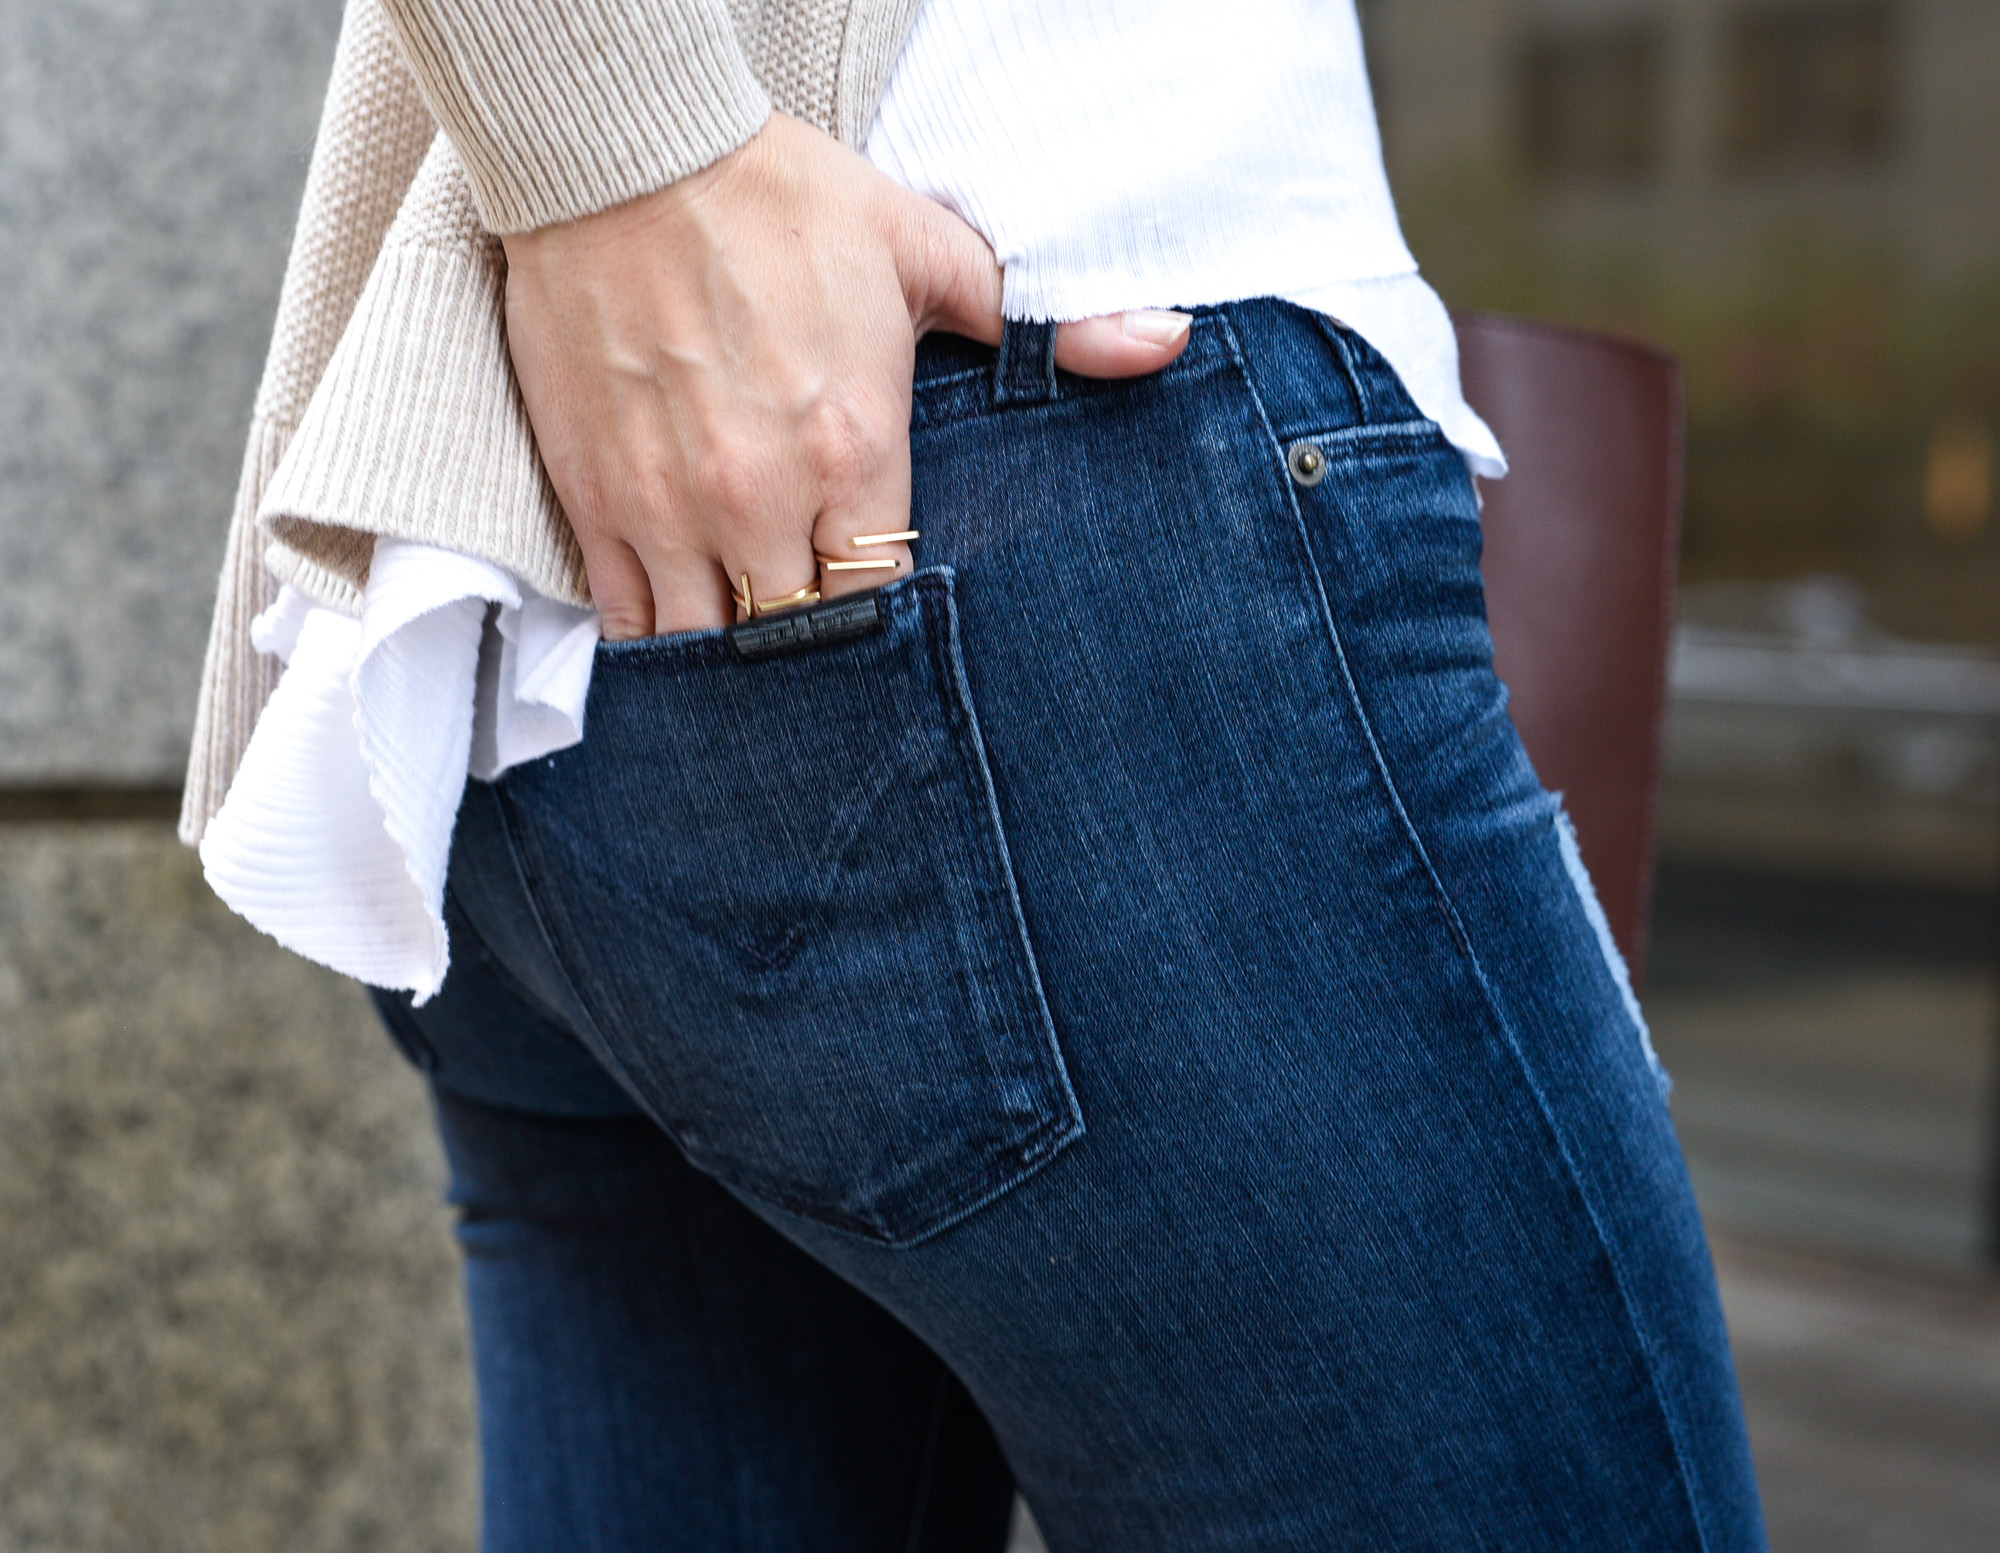 Hudson Jeans in Nico - super comfortable and stretchy denim! 